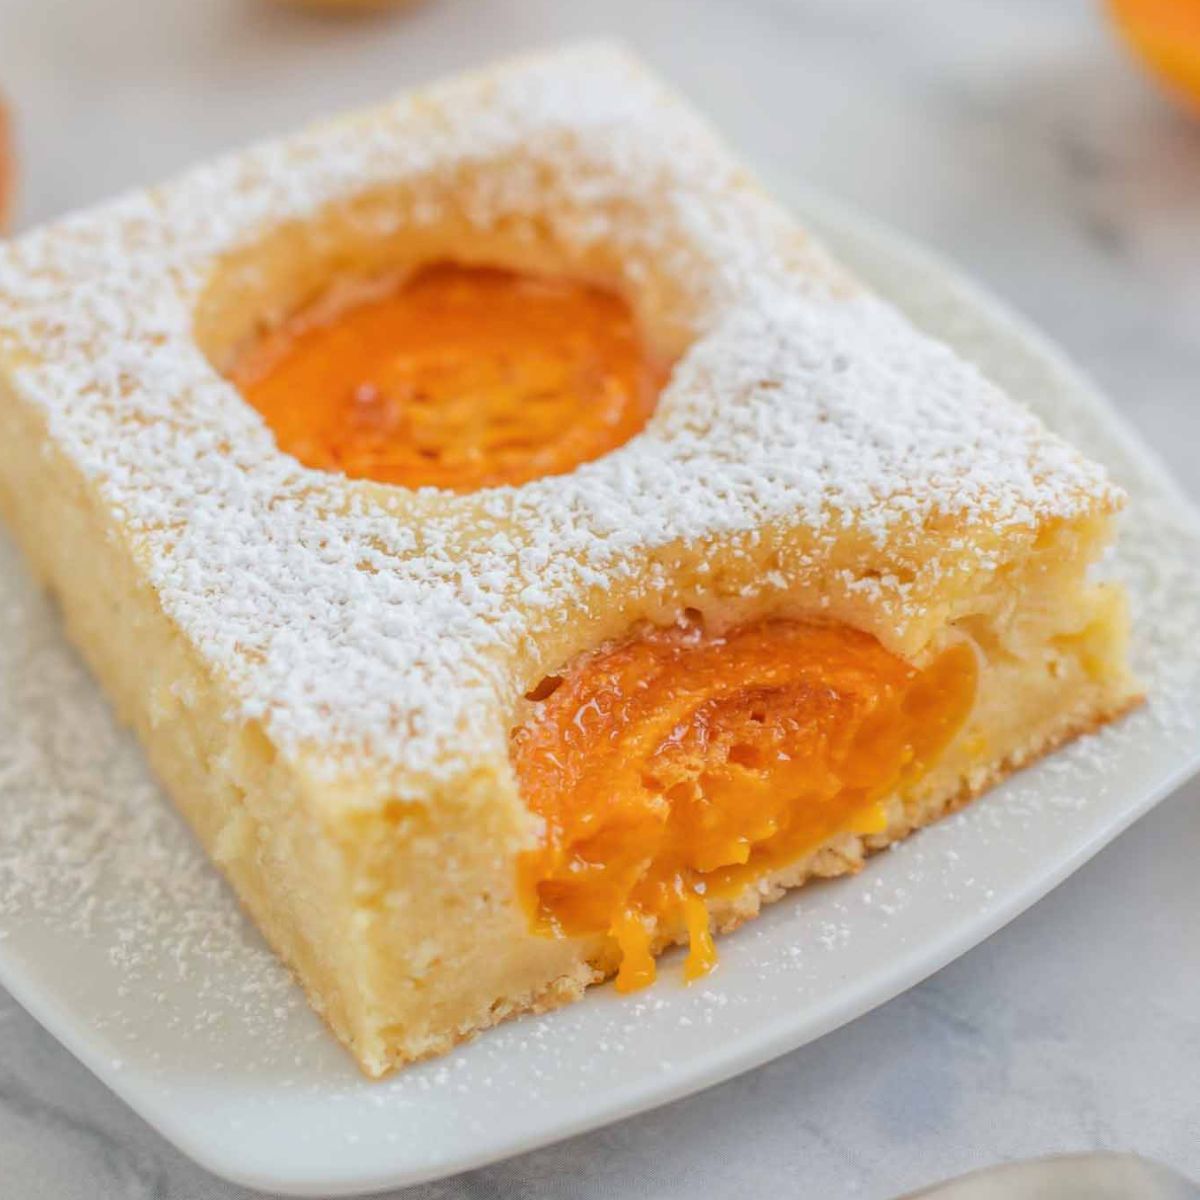 a slice of German fresh apricot sponge cake dusted with icing sugar.